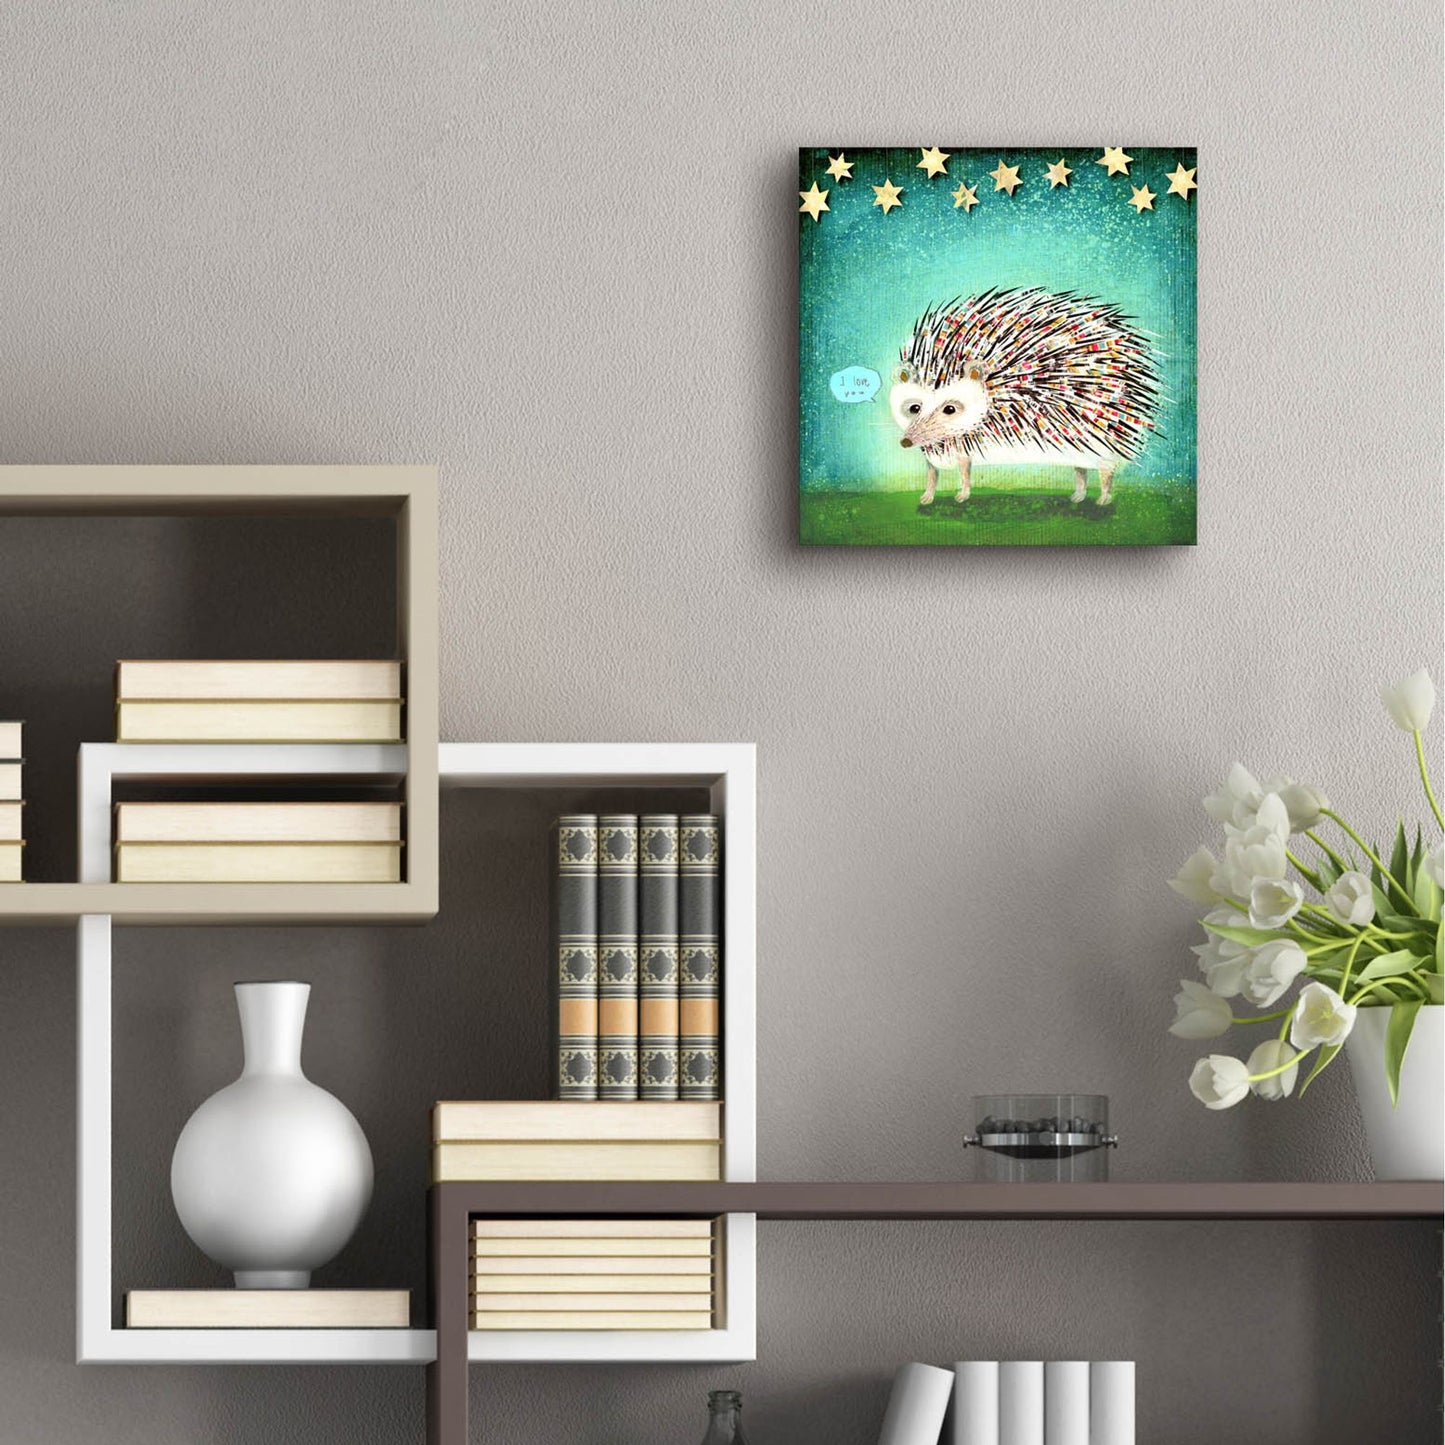 Epic Art 'Porcupine For Thomas' by Judy Verhoeven, Acrylic Glass Wall Art,12x12